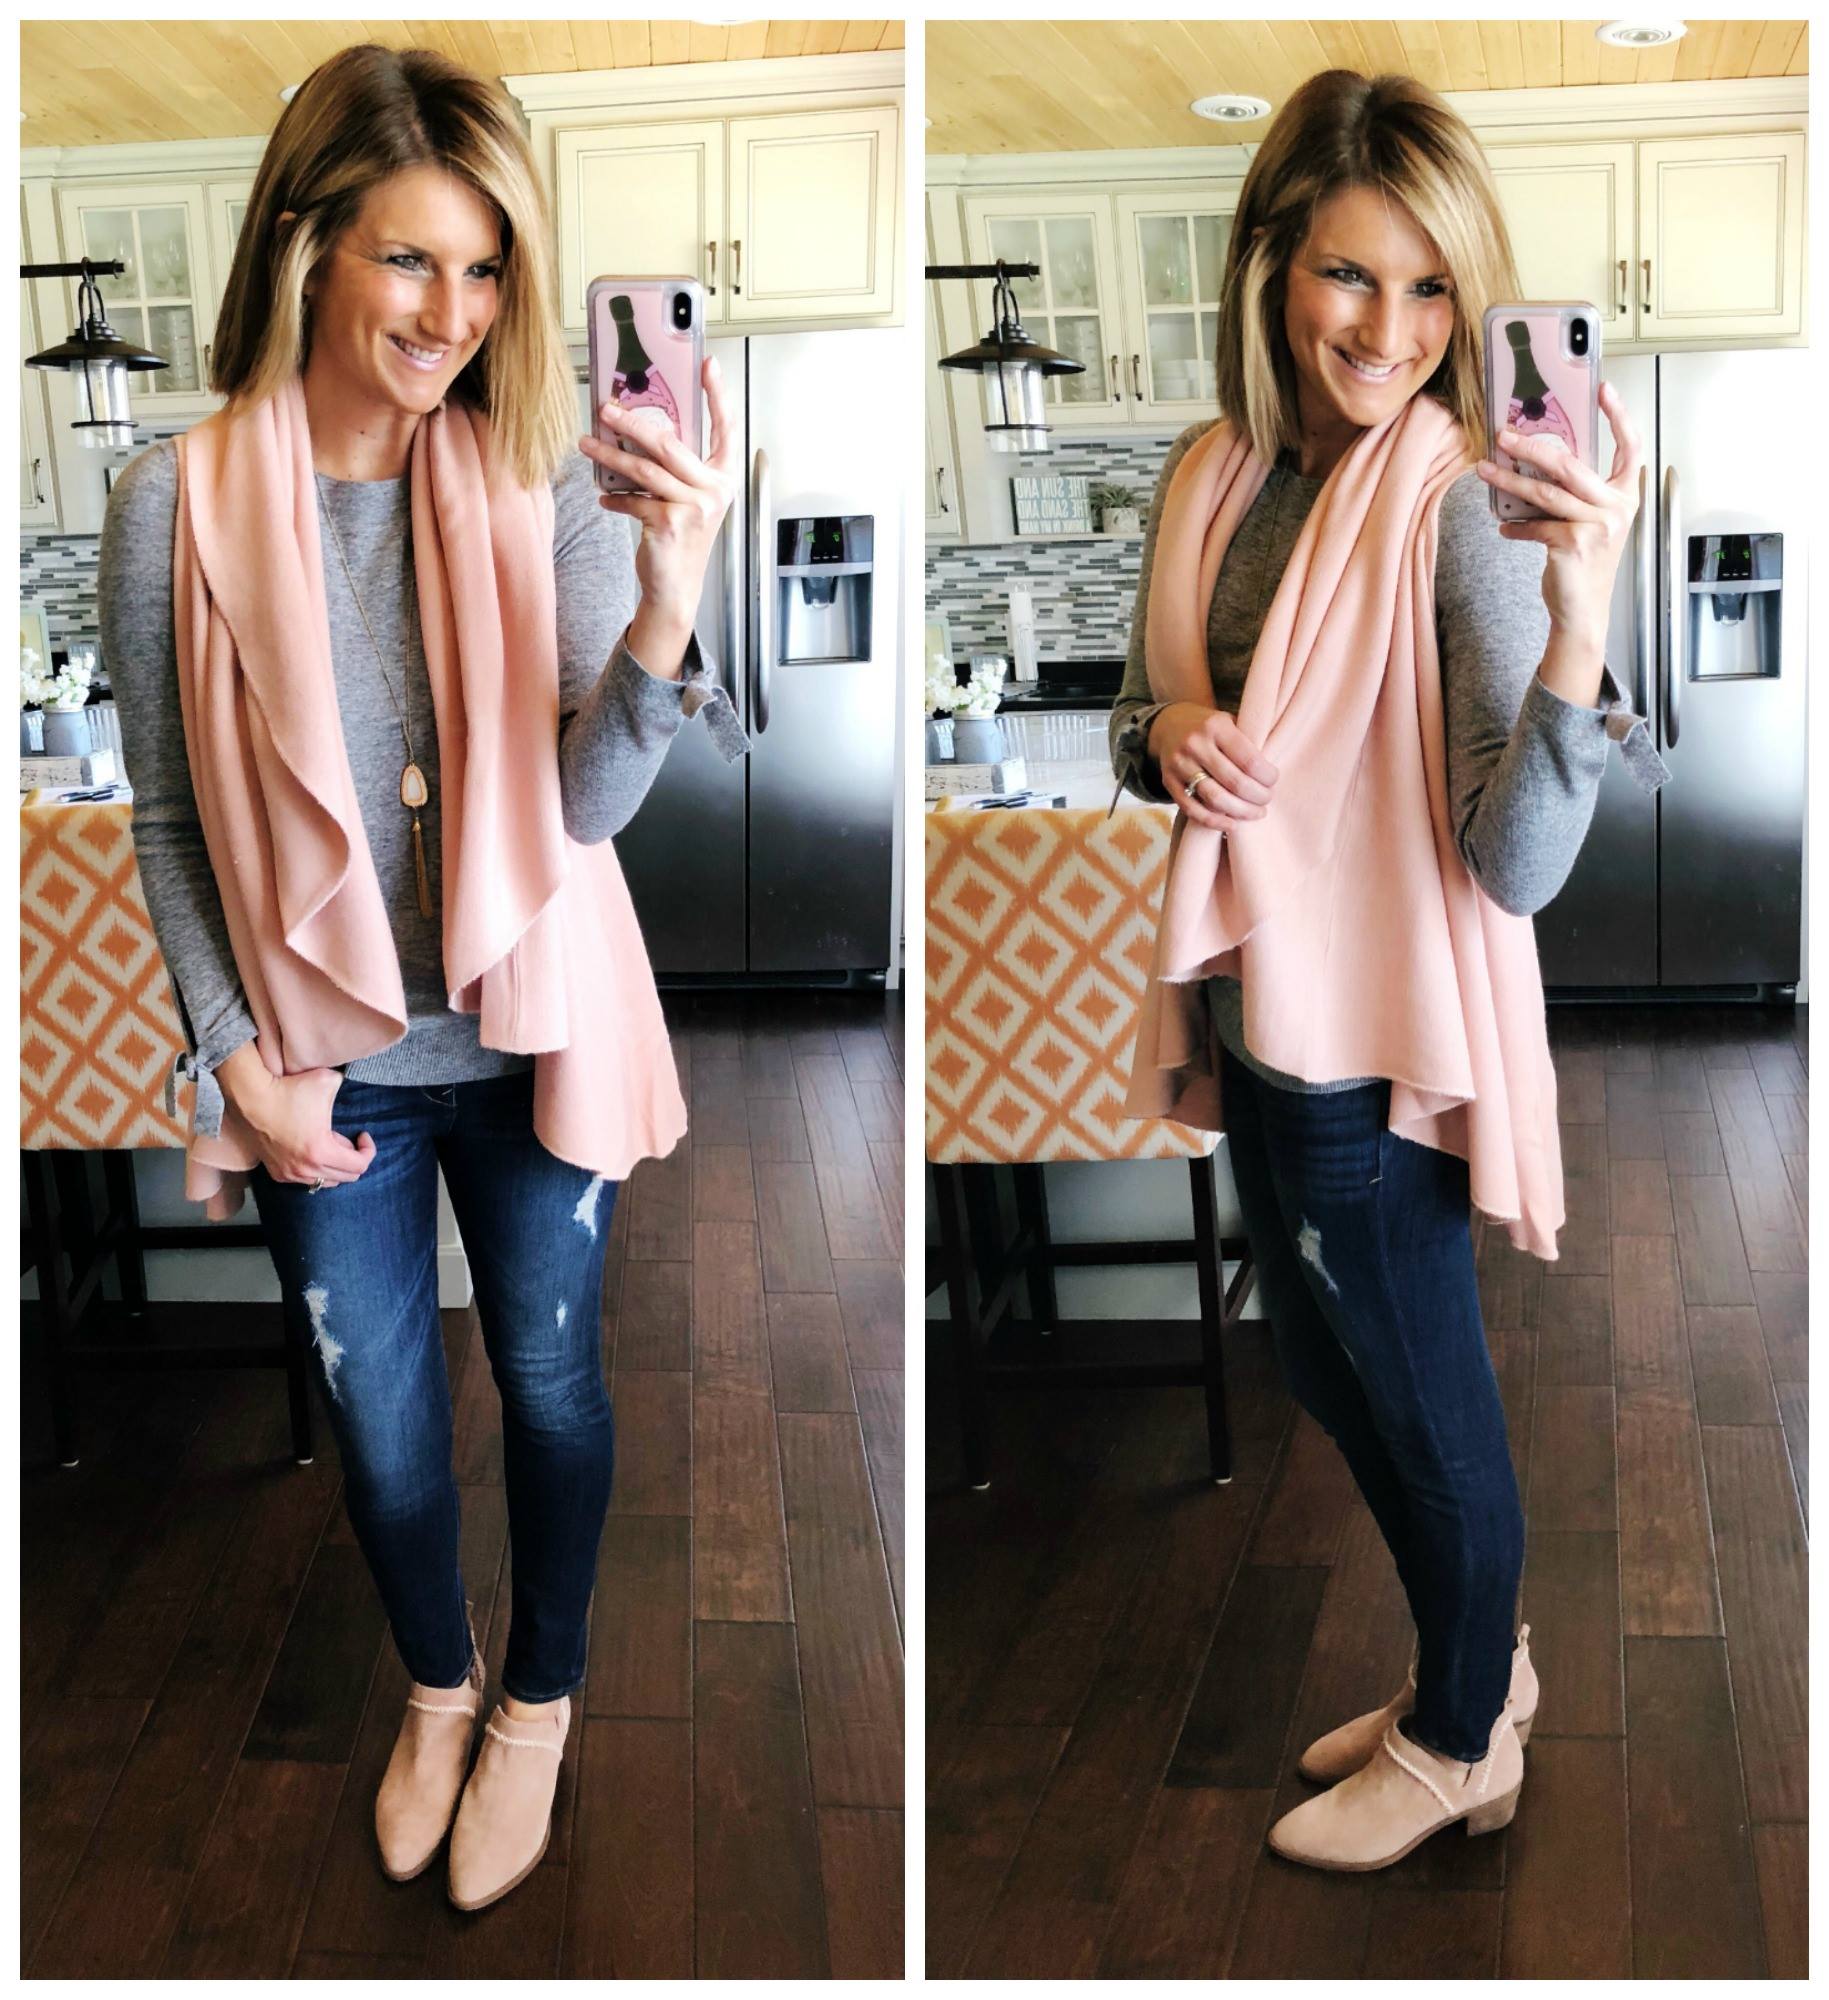 Spring Outfit // How to Wear a Shawl Vest // Tie Cuff Sweater + Distressed Jeggings + Blush Vest + Booties